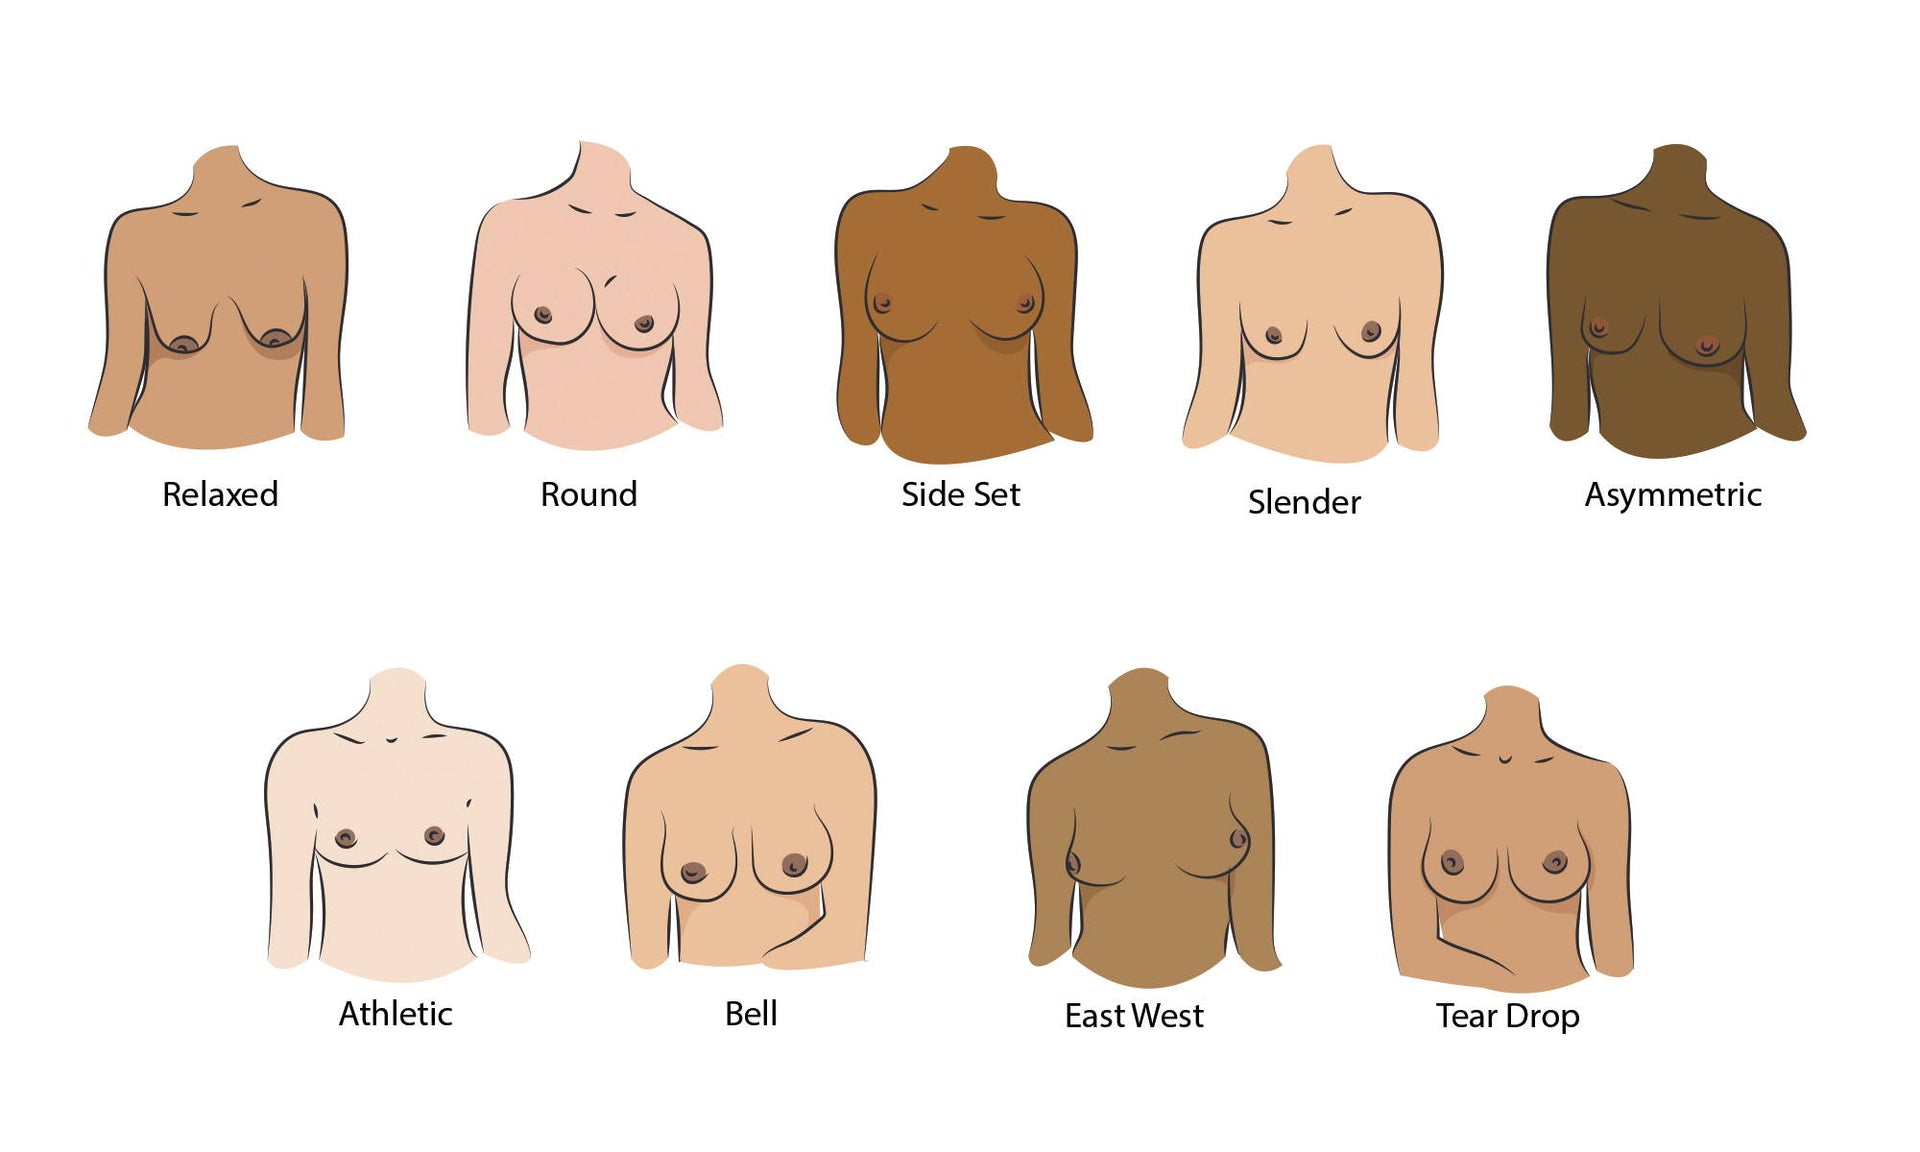 What is the most attractive shape for nipples/areolas and tits? - Sexuality